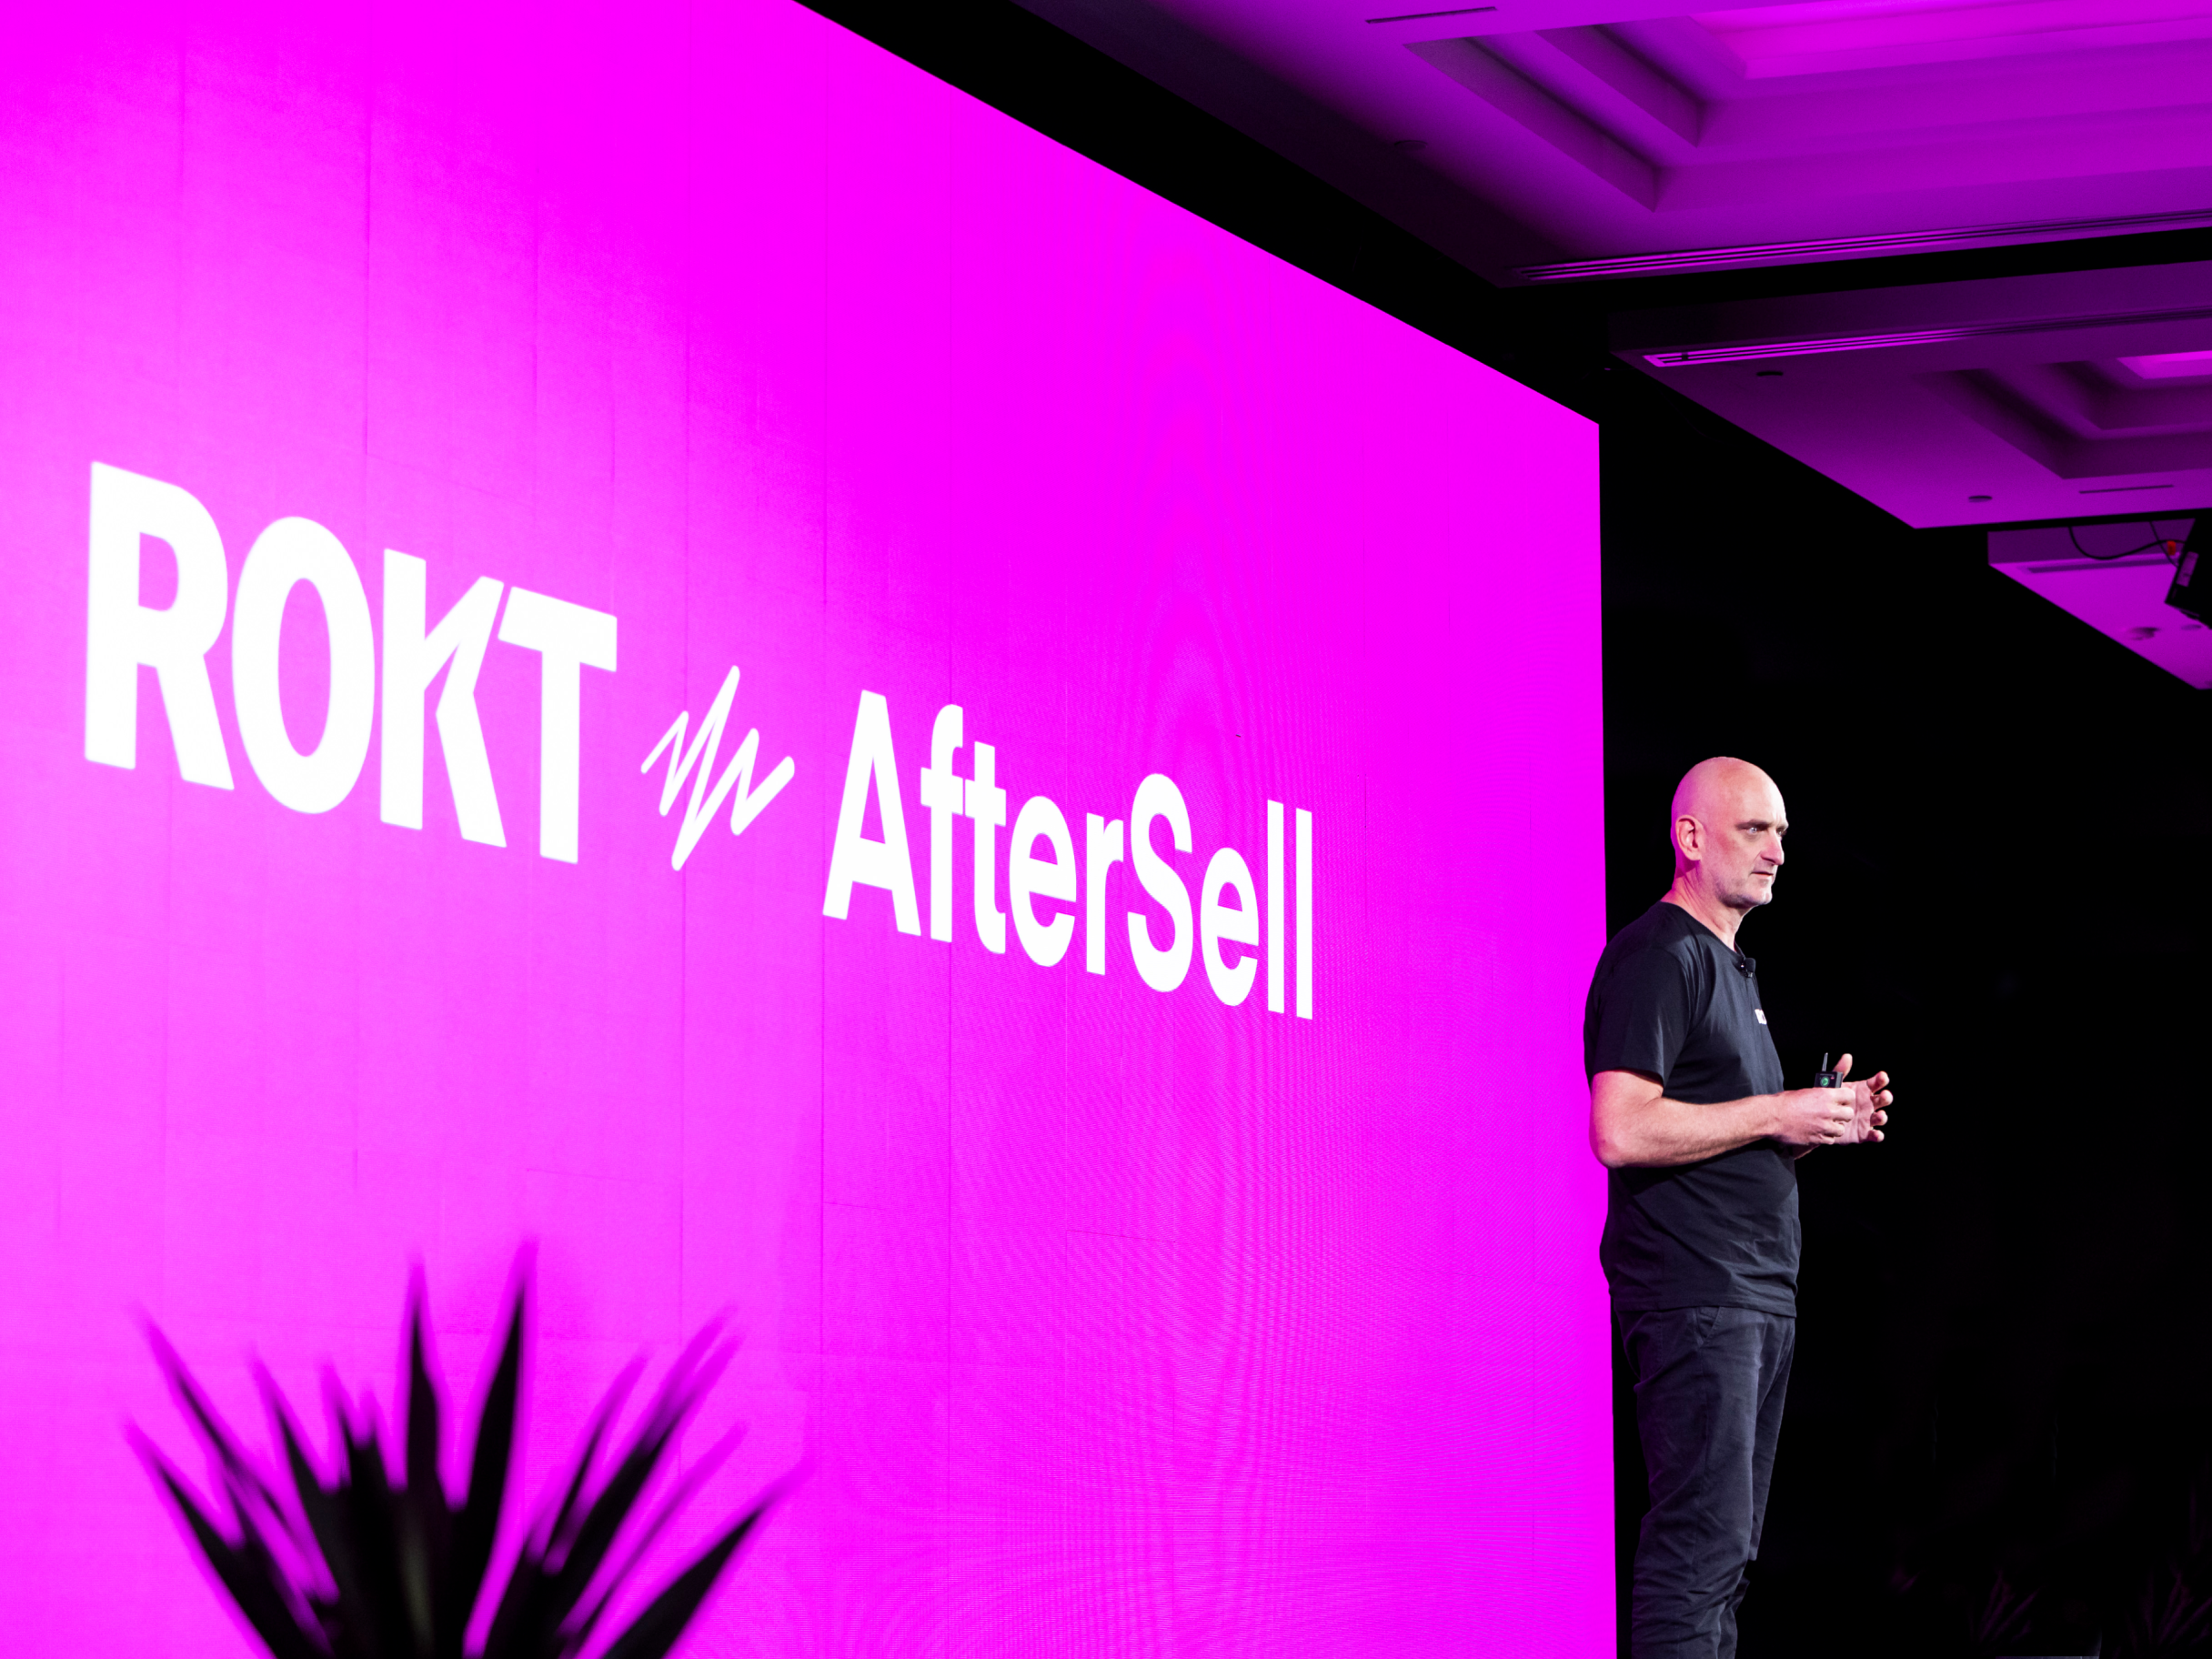 Rokt acquires AfterSell to expand SMB offering and unlock more relevant experiences for Shopify customers